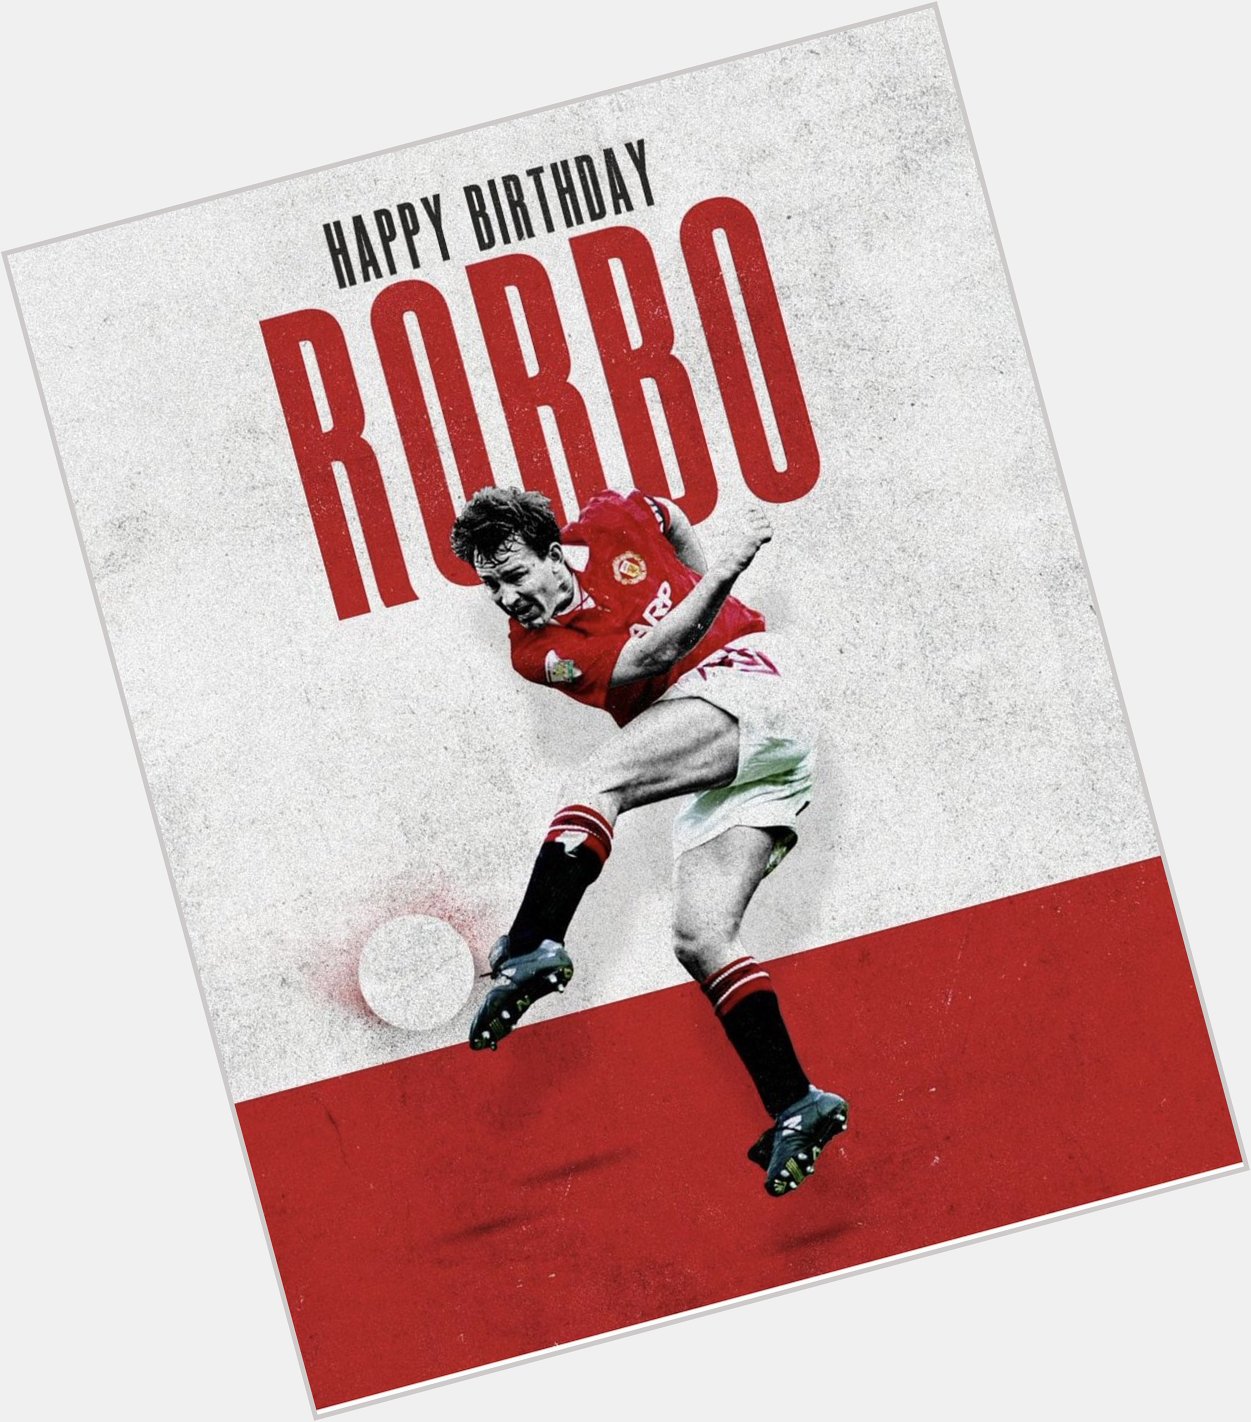 Manchester United .....
Wishing a very happy 65th birthday to the one and only Bryan Robson! 